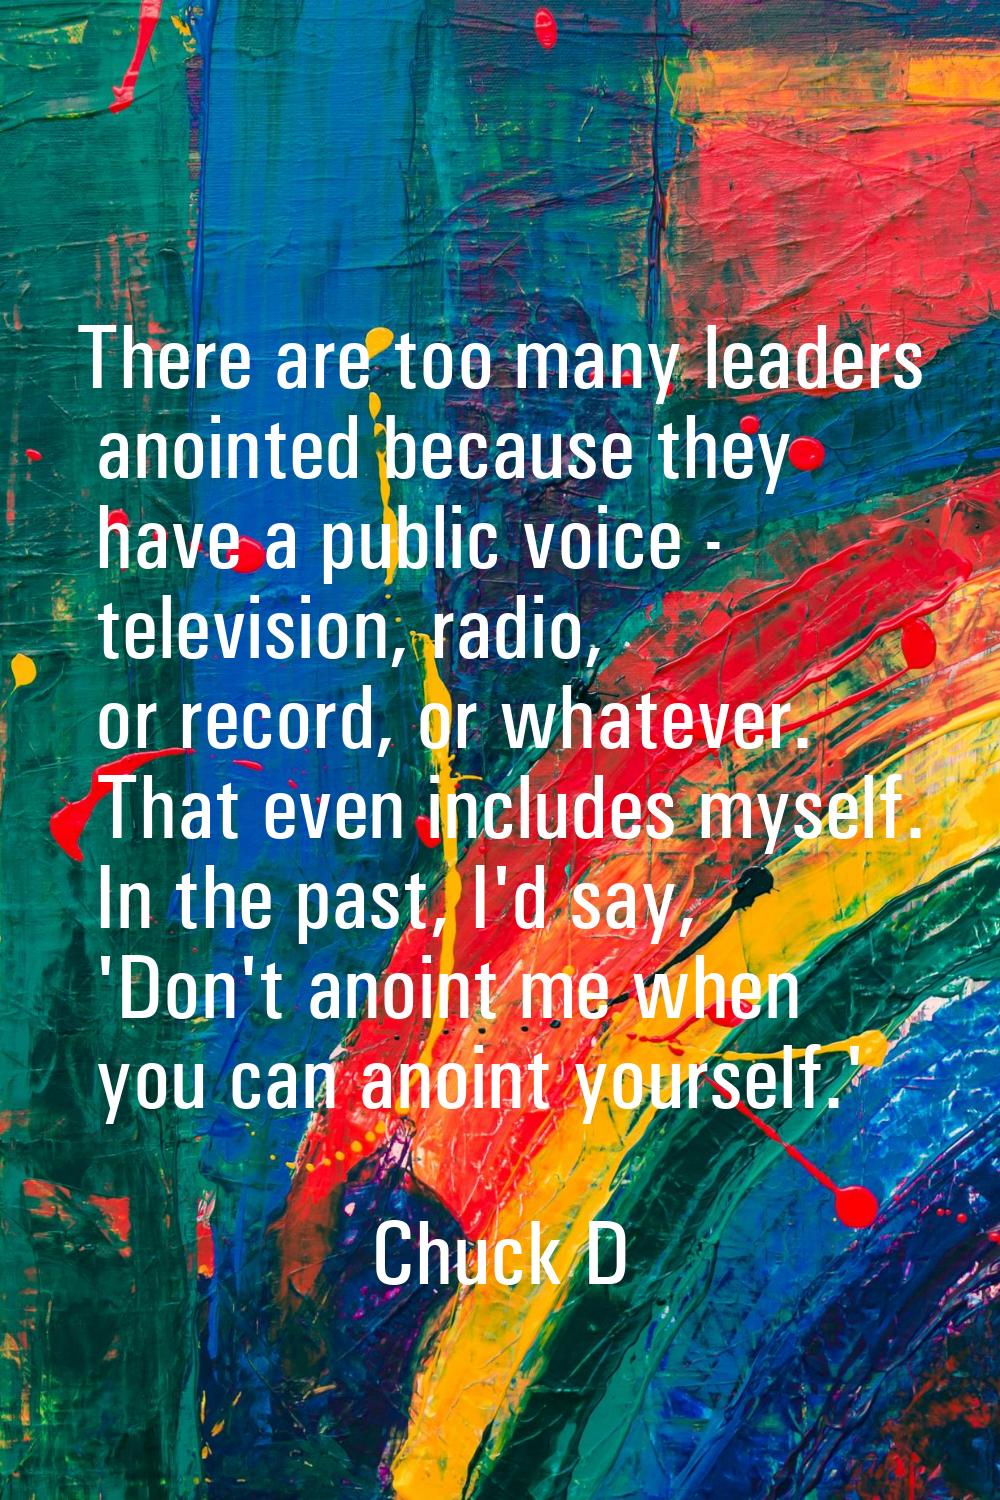 There are too many leaders anointed because they have a public voice - television, radio, or record